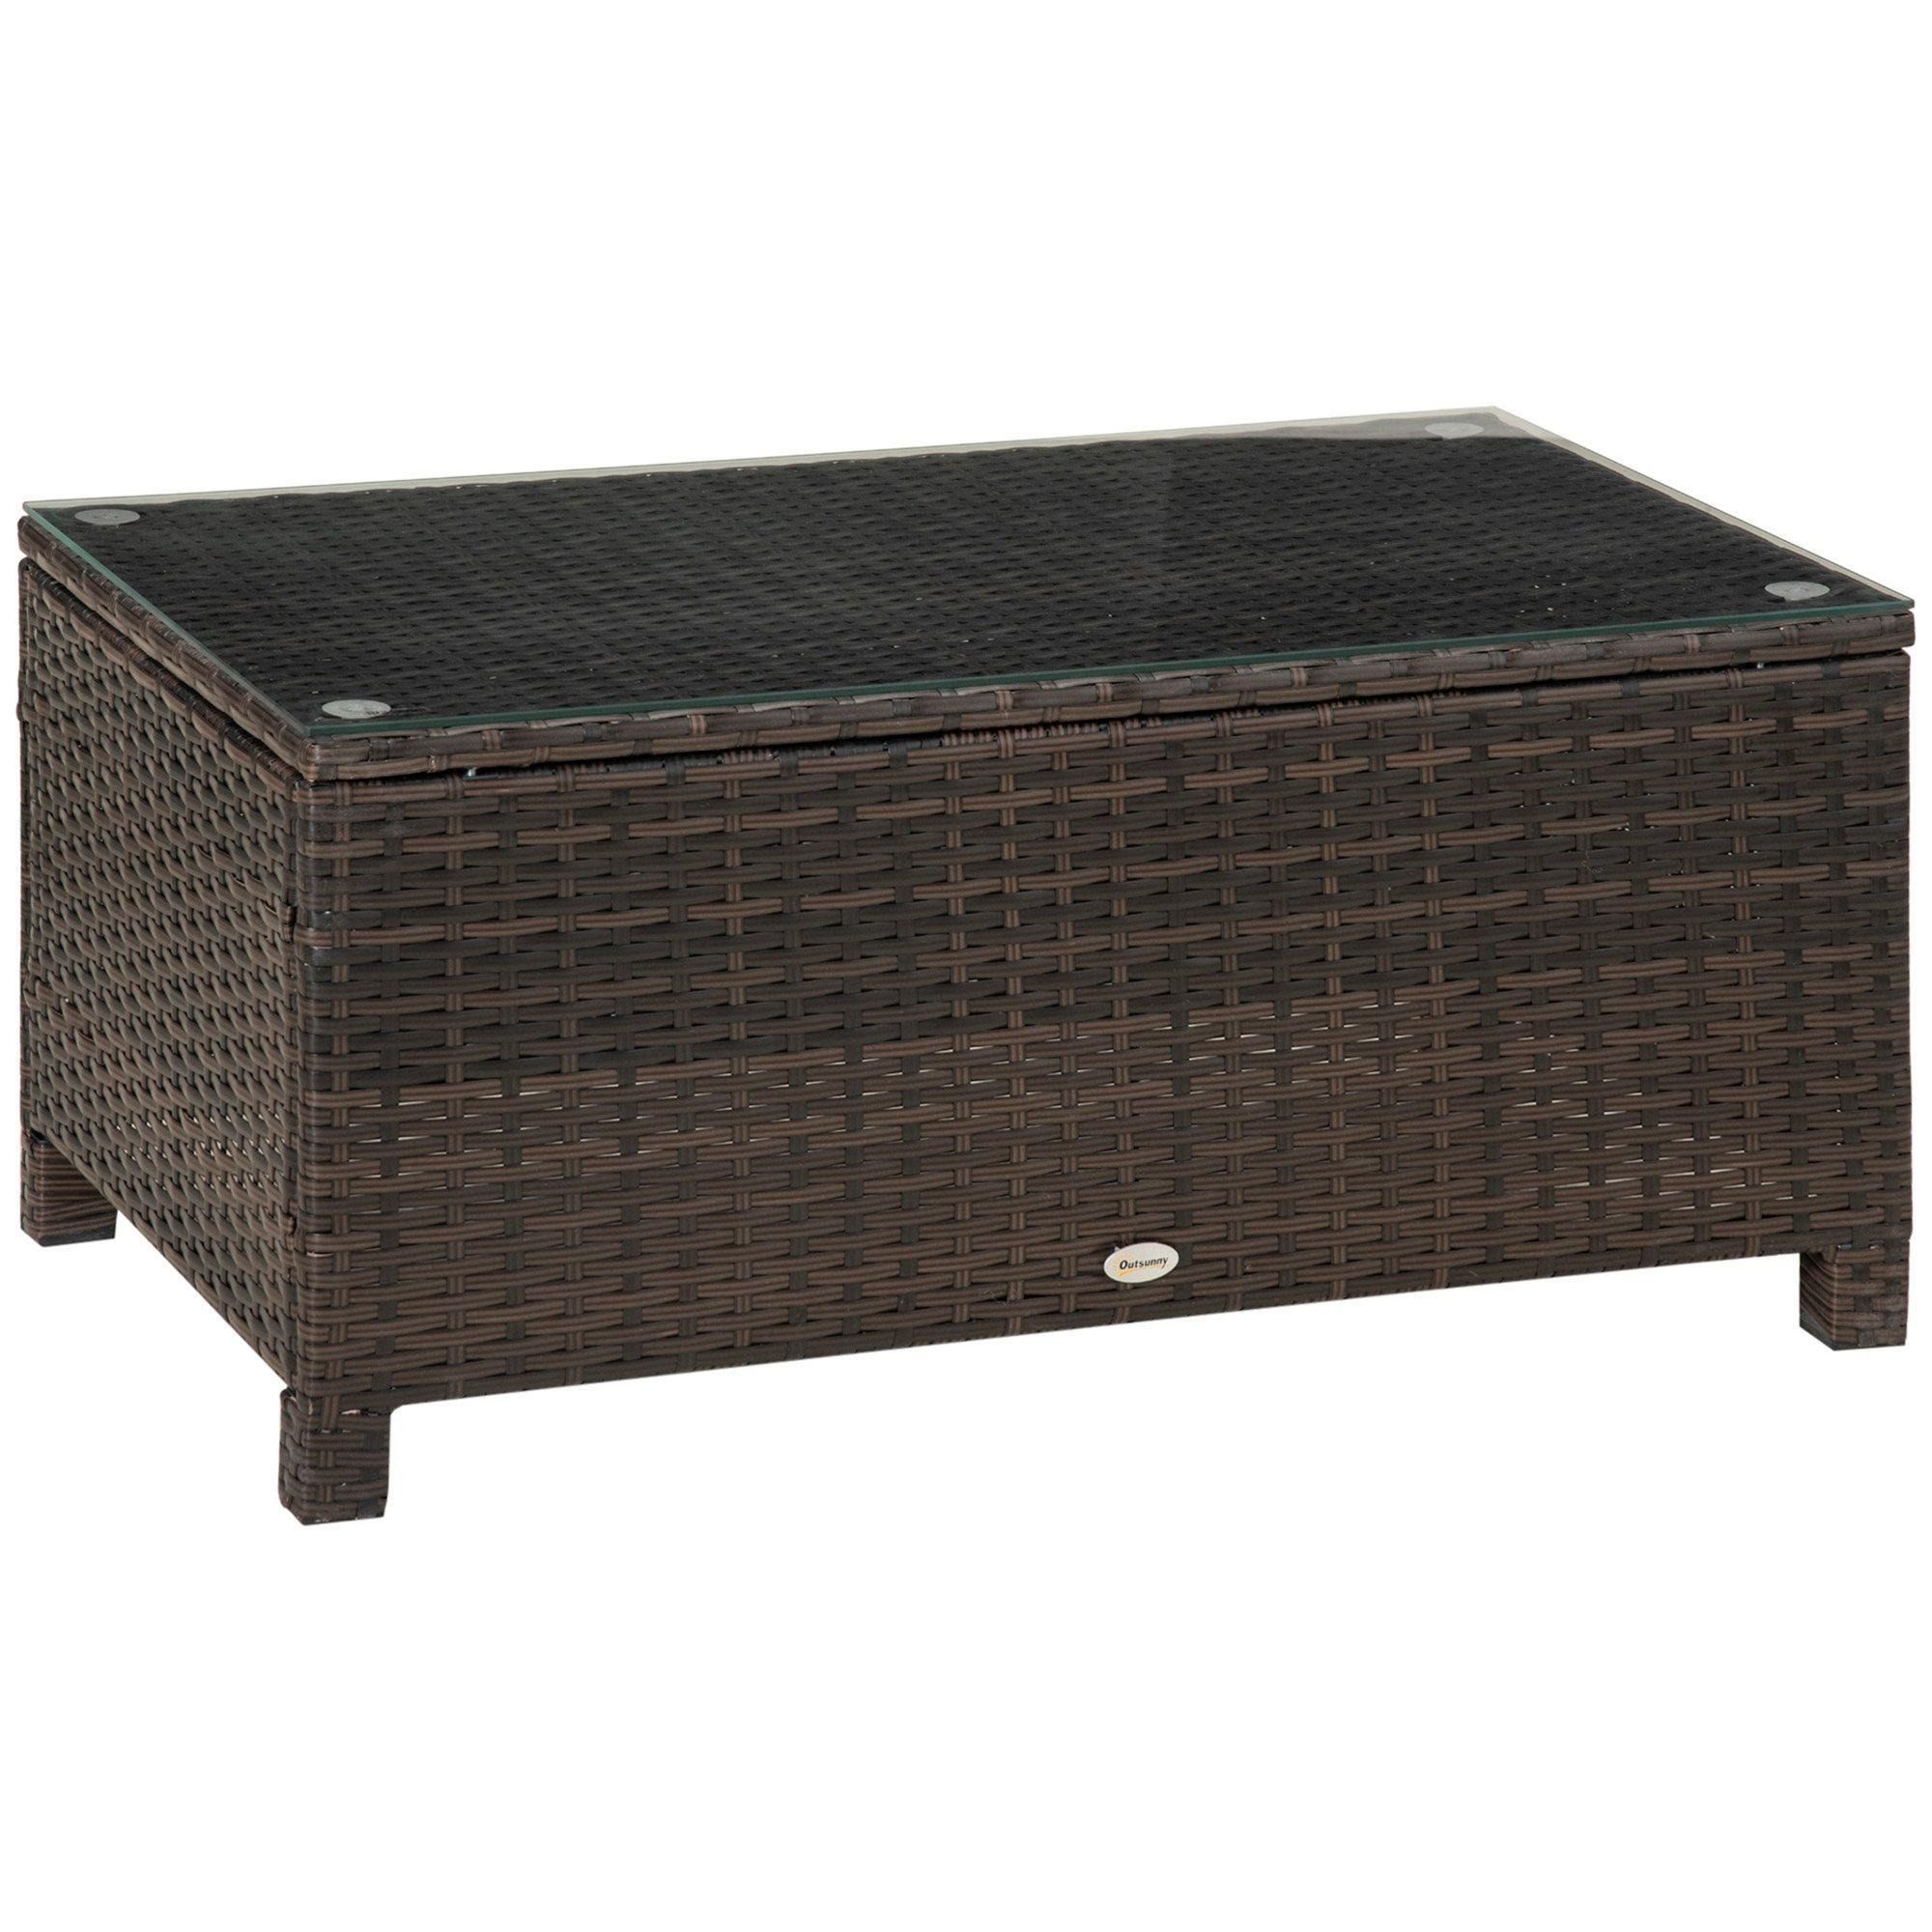 Rattan Garden Furniture Weave Wicker Coffee Table with Tempered Glass - image 1